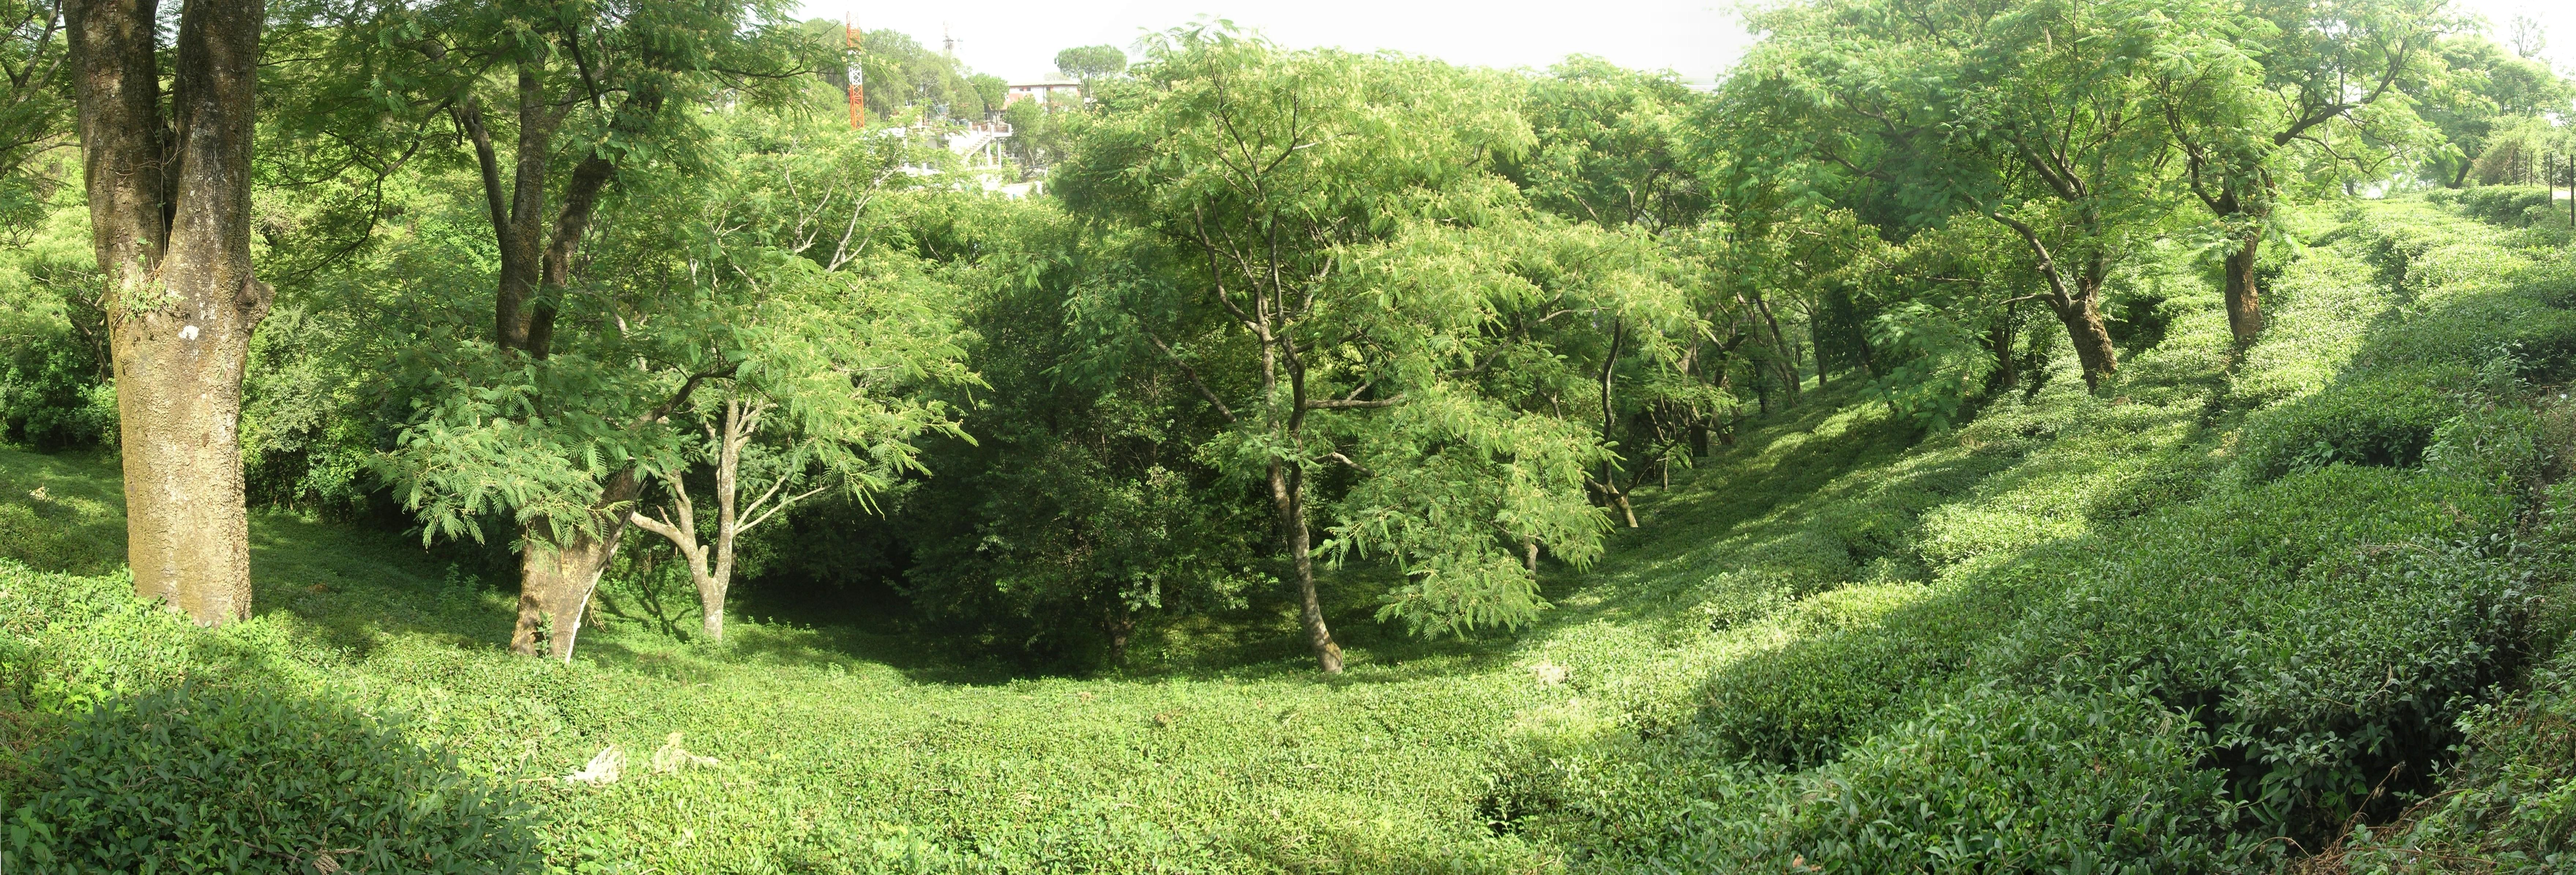 Panoramic view of a portion of a tea estate